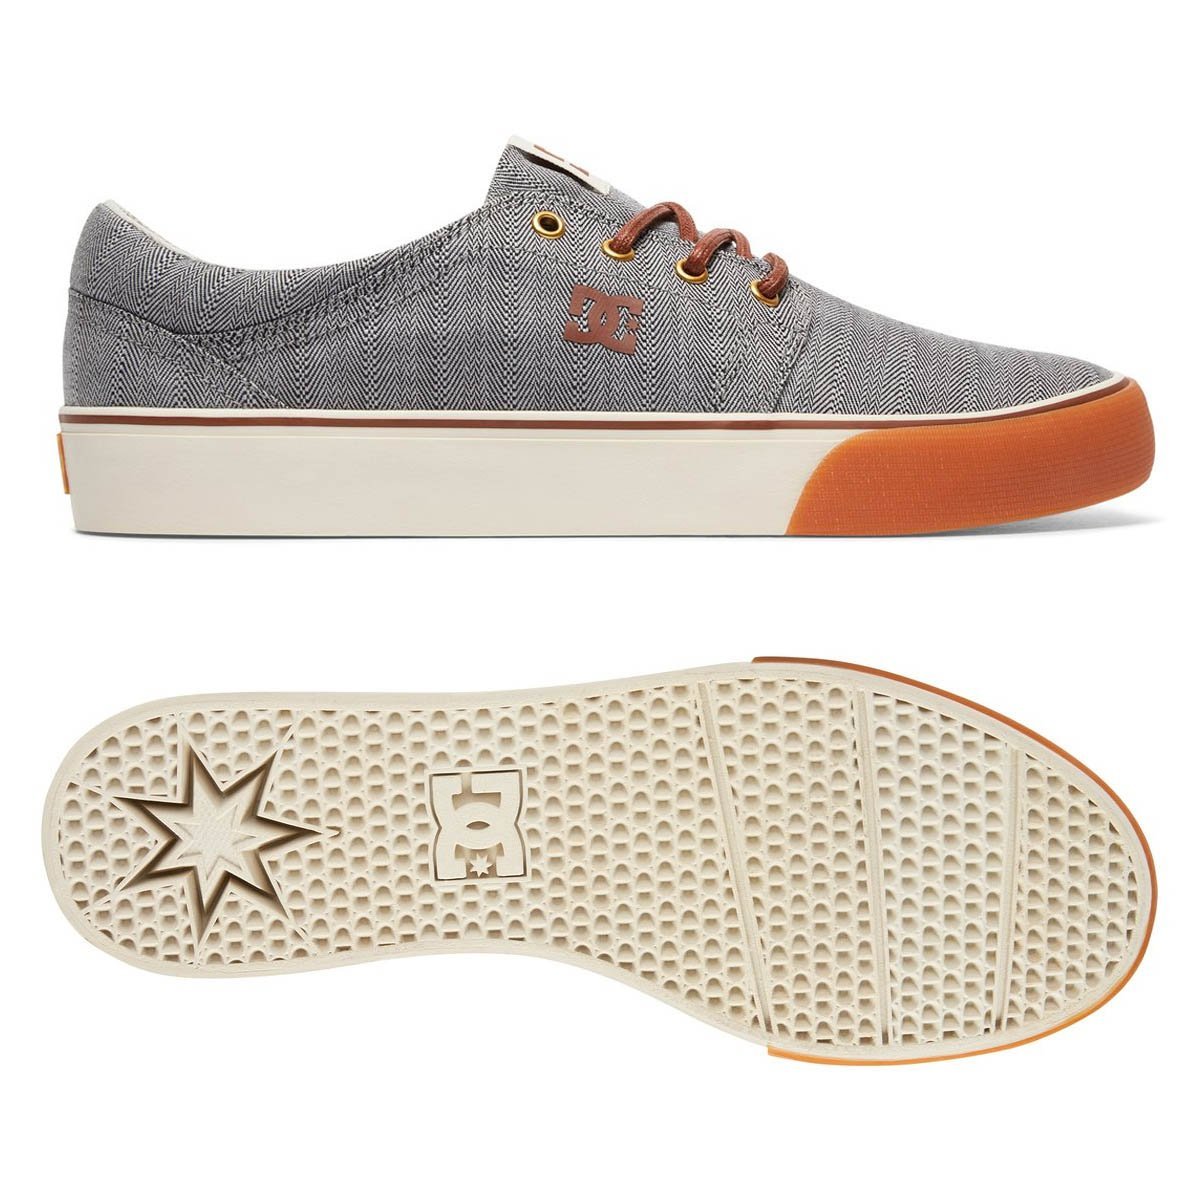 Tenis Trase Tx Dc Shoes - Caballero